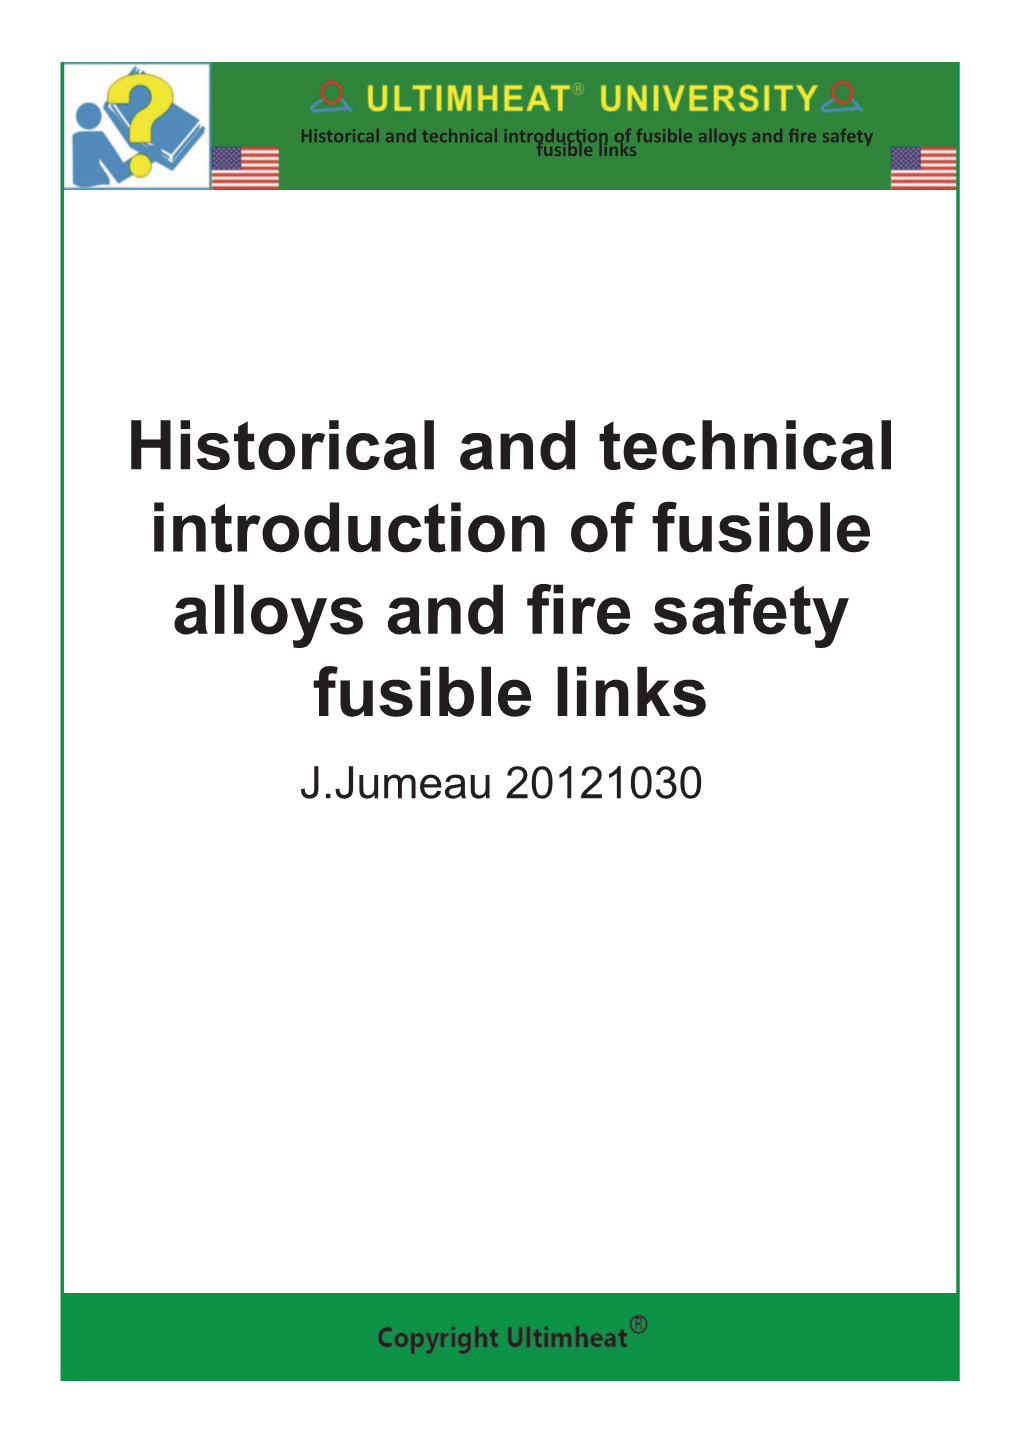 Historical and Technical Introduction of Fusible Alloys and Fire Safety Fusible Links